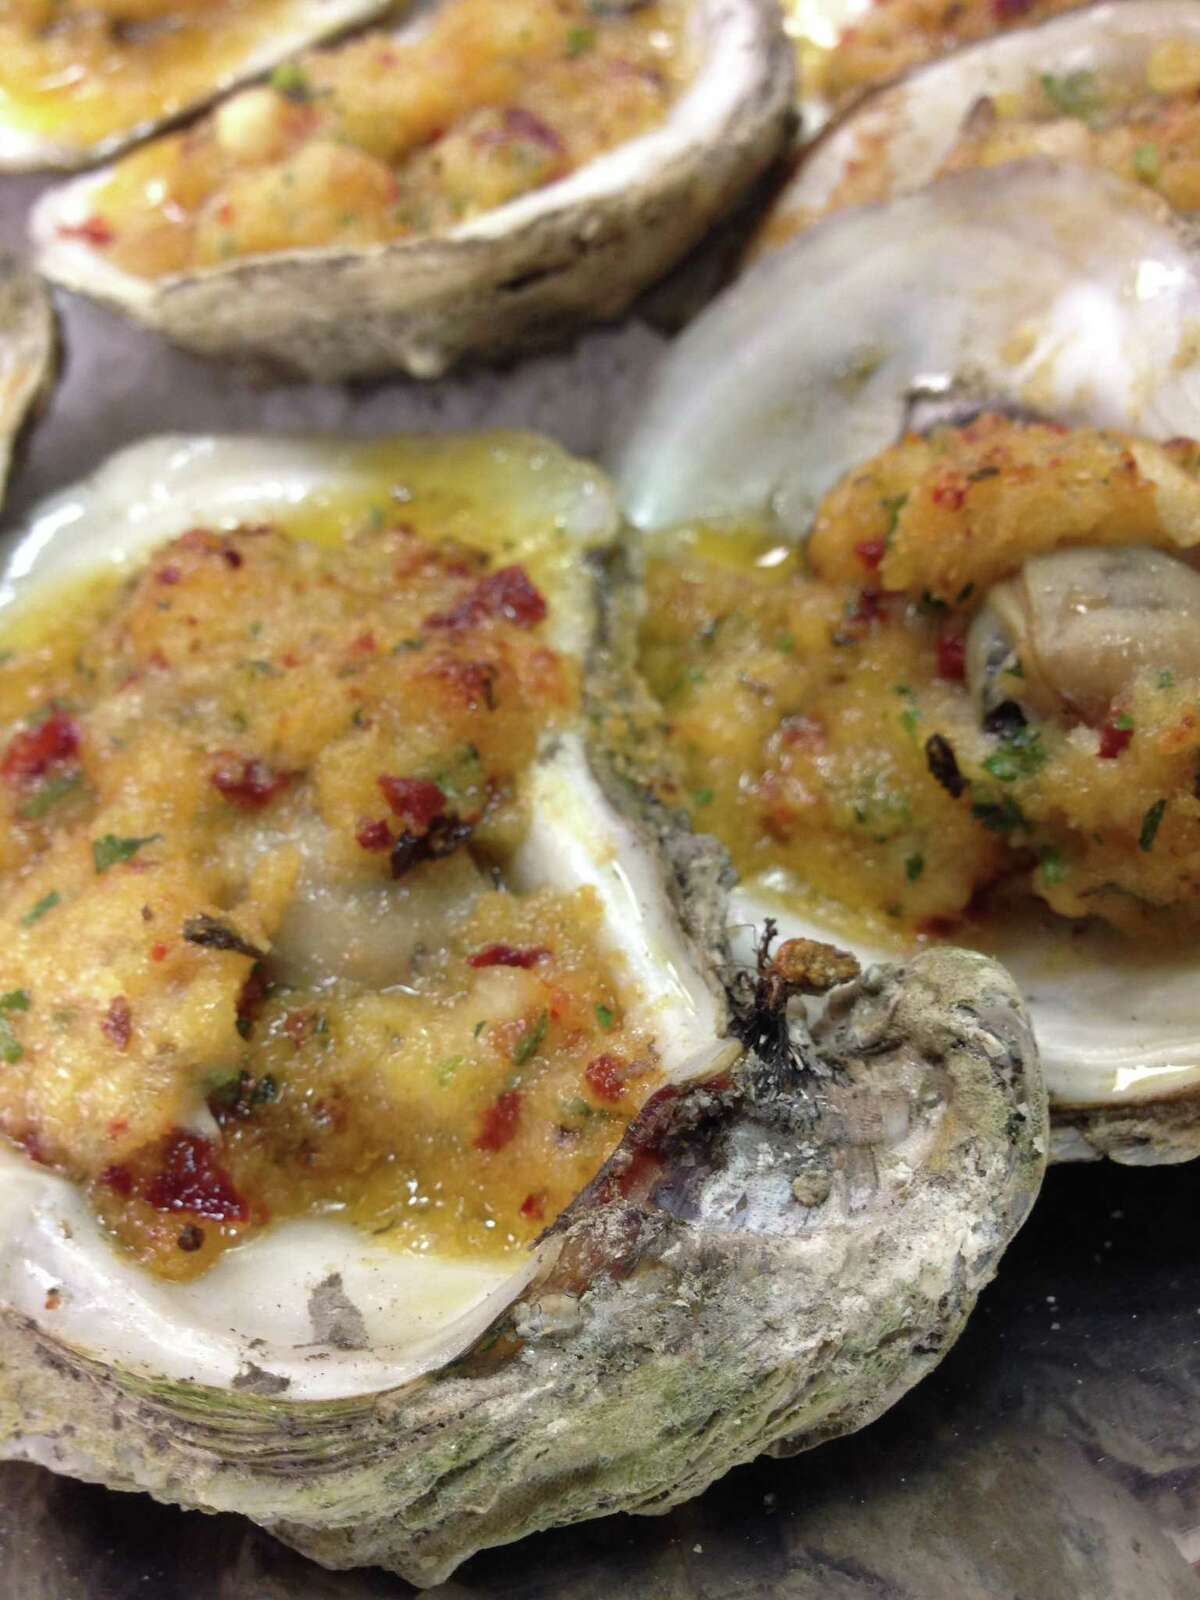 Ostiones Asados -- wood-roasted Gulf oysters with chipotle butter from Caracol, Houston.